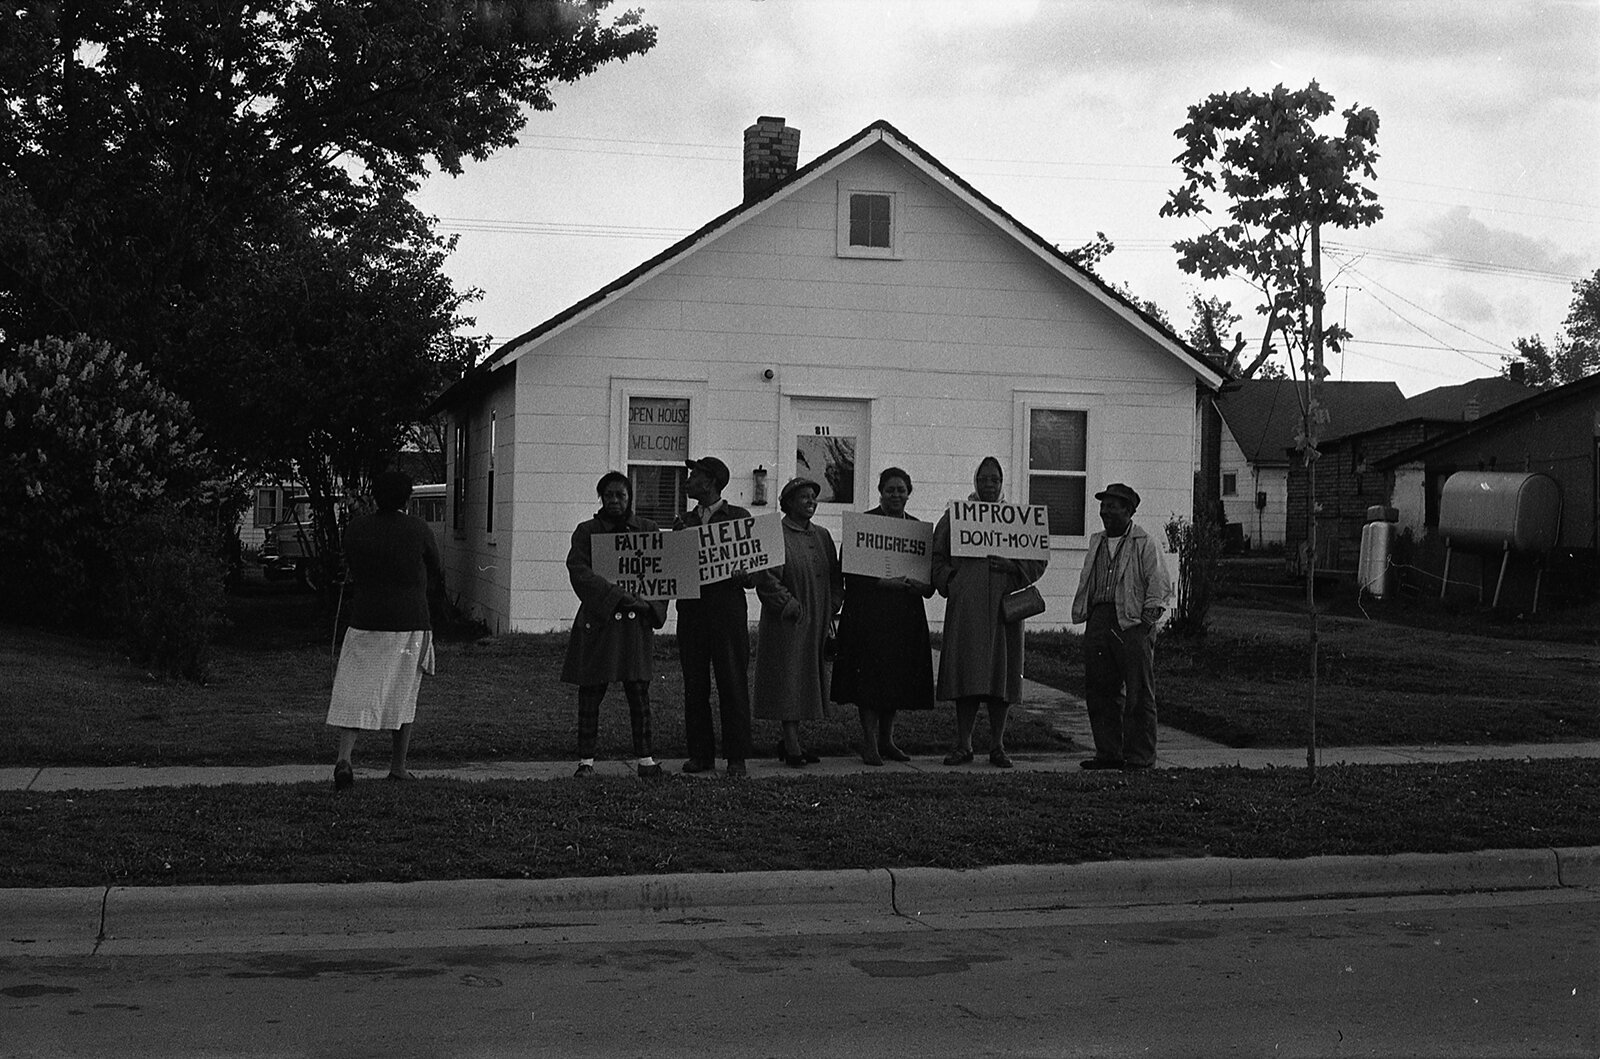 A 1961 photo from the Ann Arbor News shows a protest outside the Urban Renewal office in Ypsilanti. Historian Lee Azus discusses urban renewal in the city on the new episode of the "Ypsi Stories" podcast.